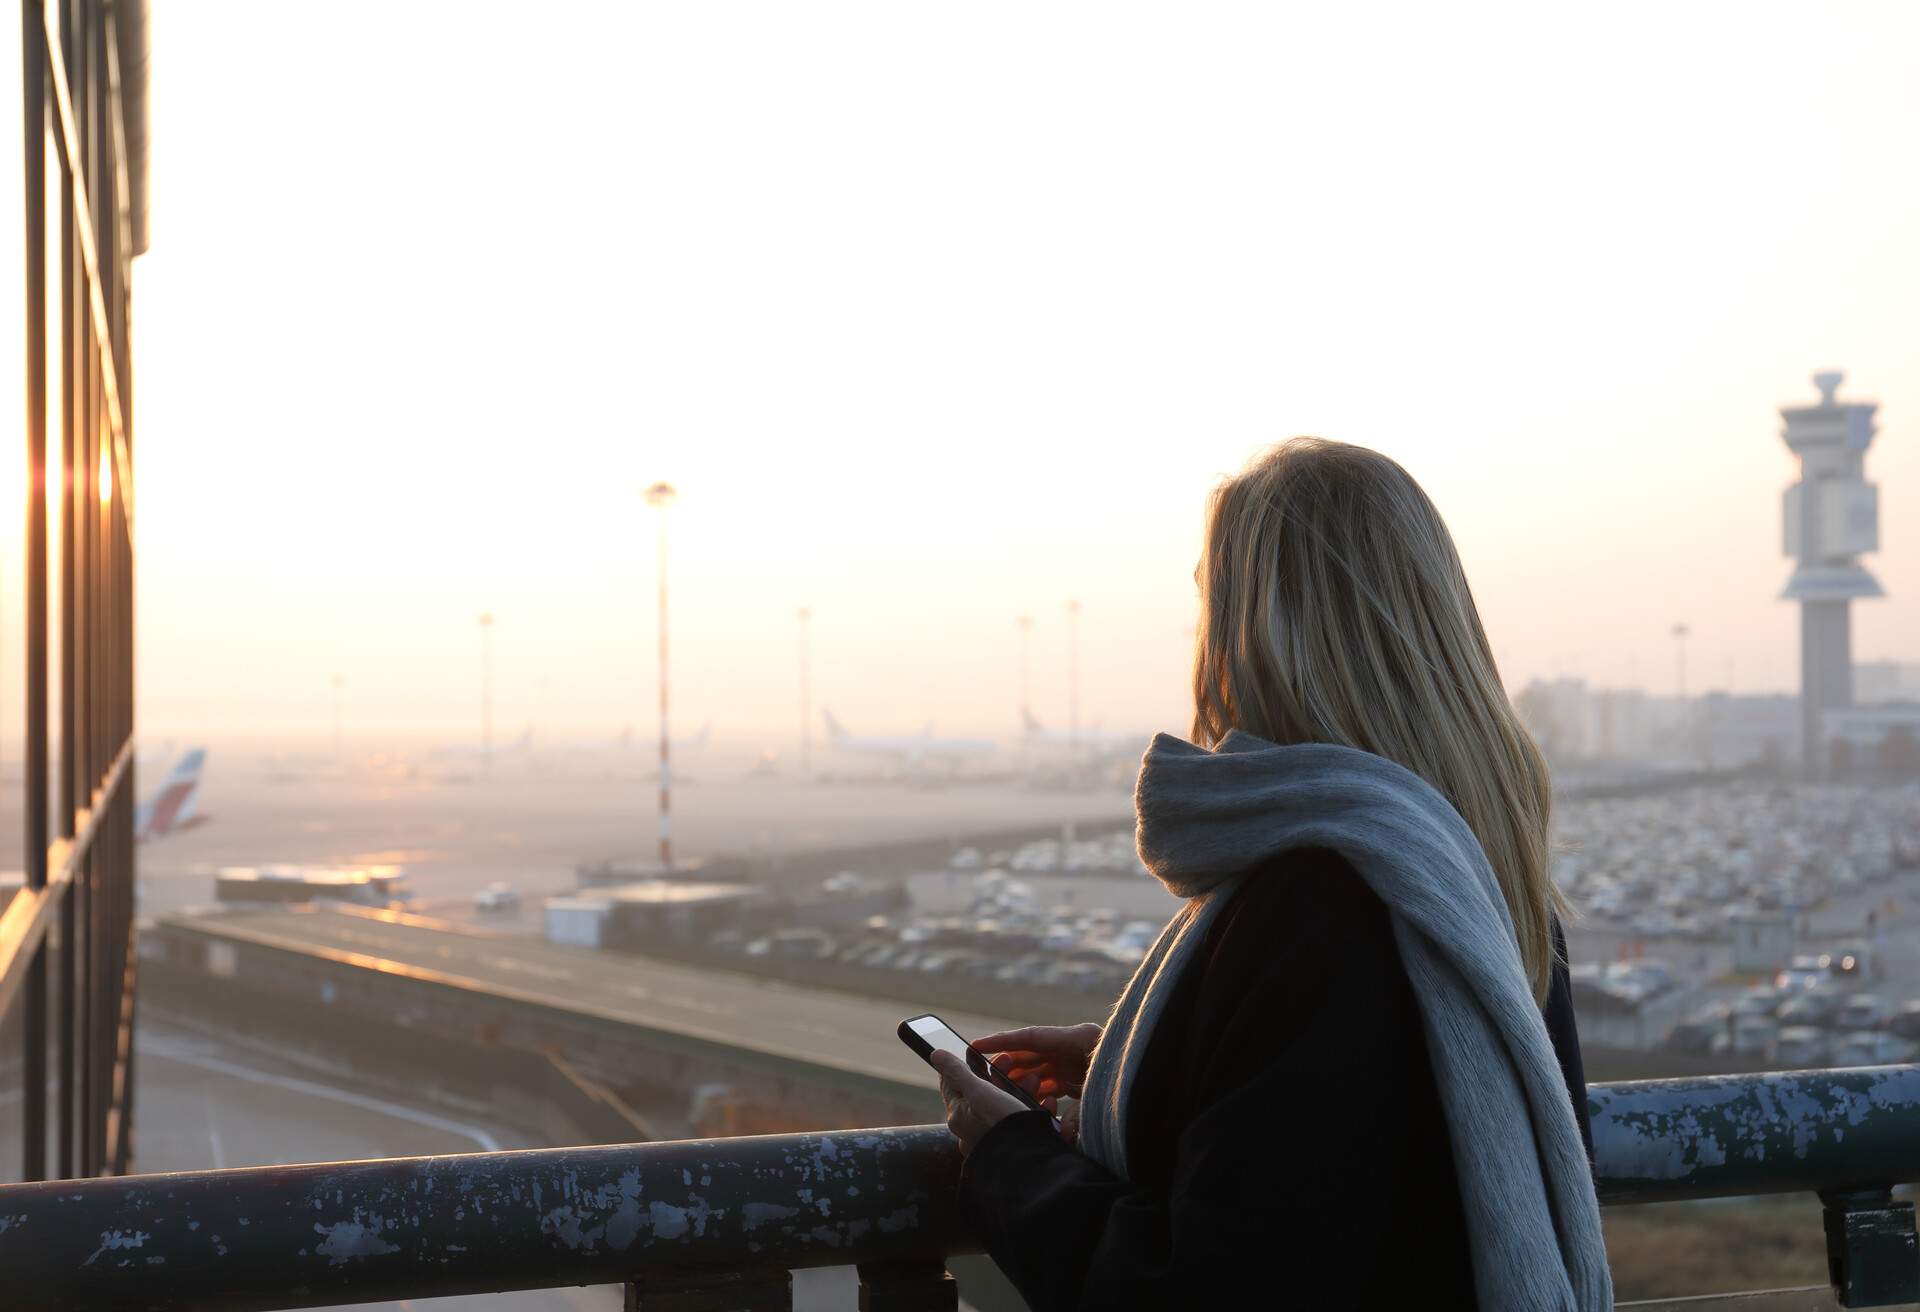 Woman looks out to airport tarmac and sunrise.